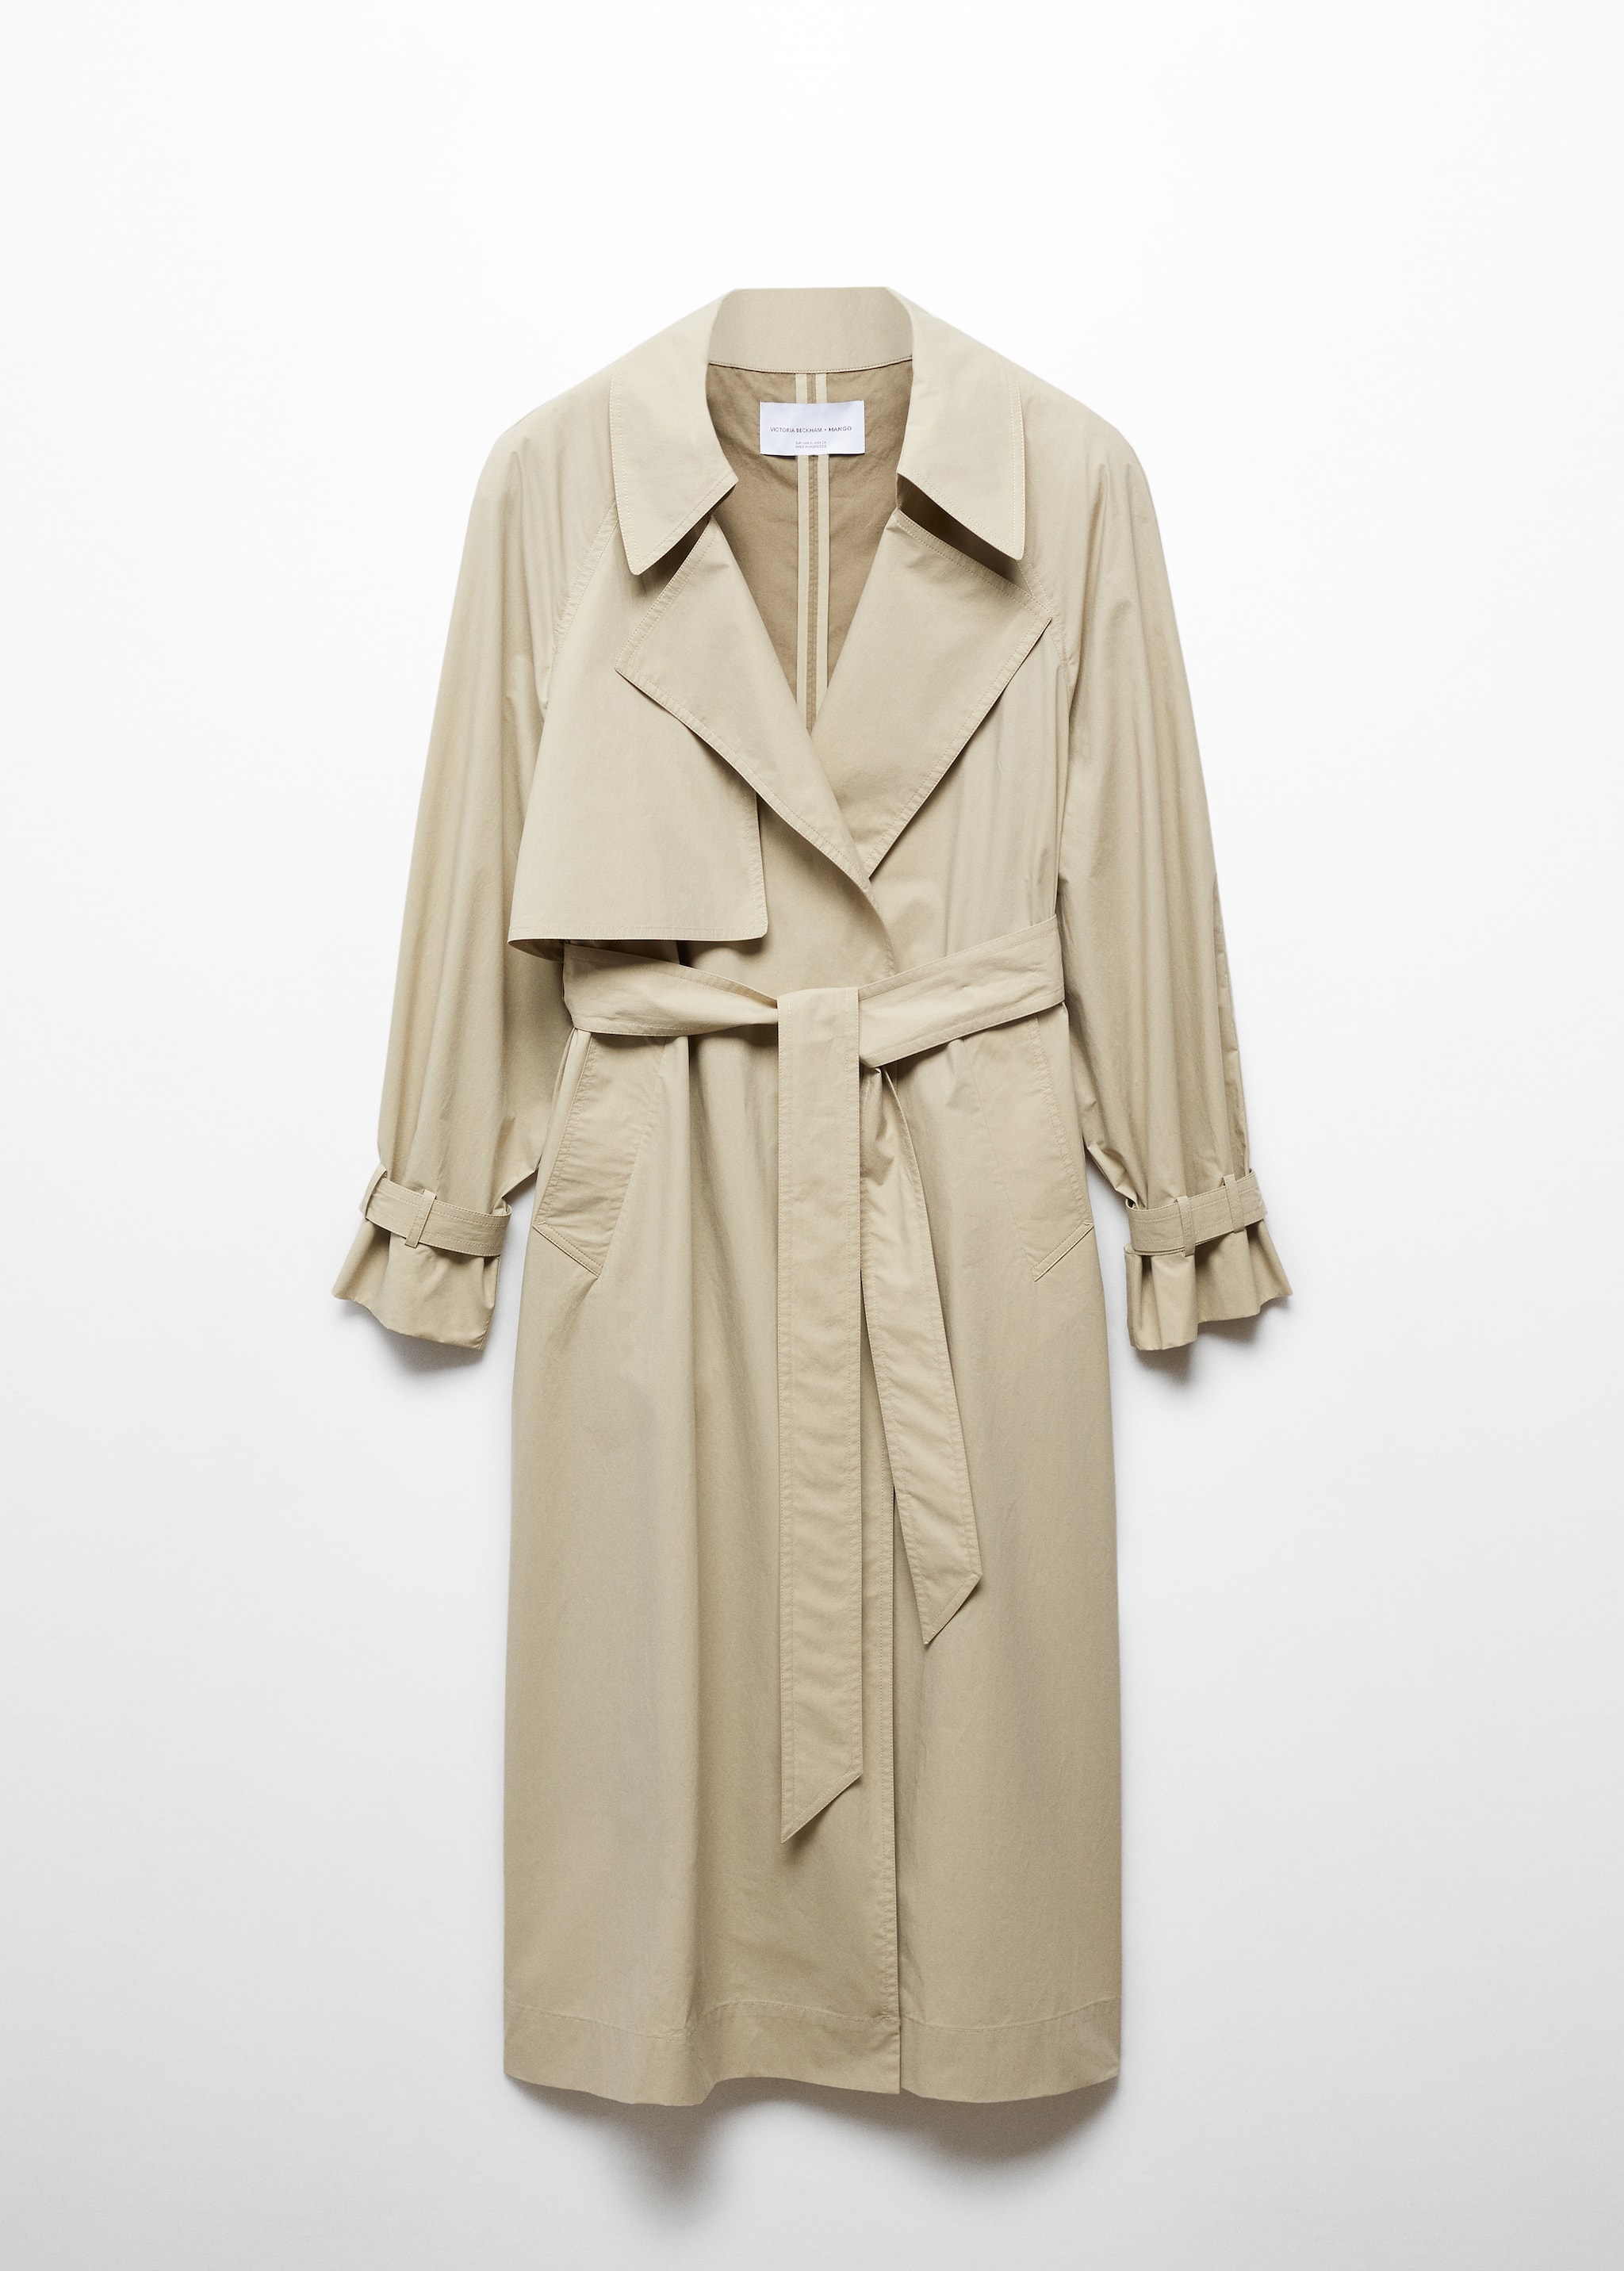 100% cotton long trench coat - Article without model